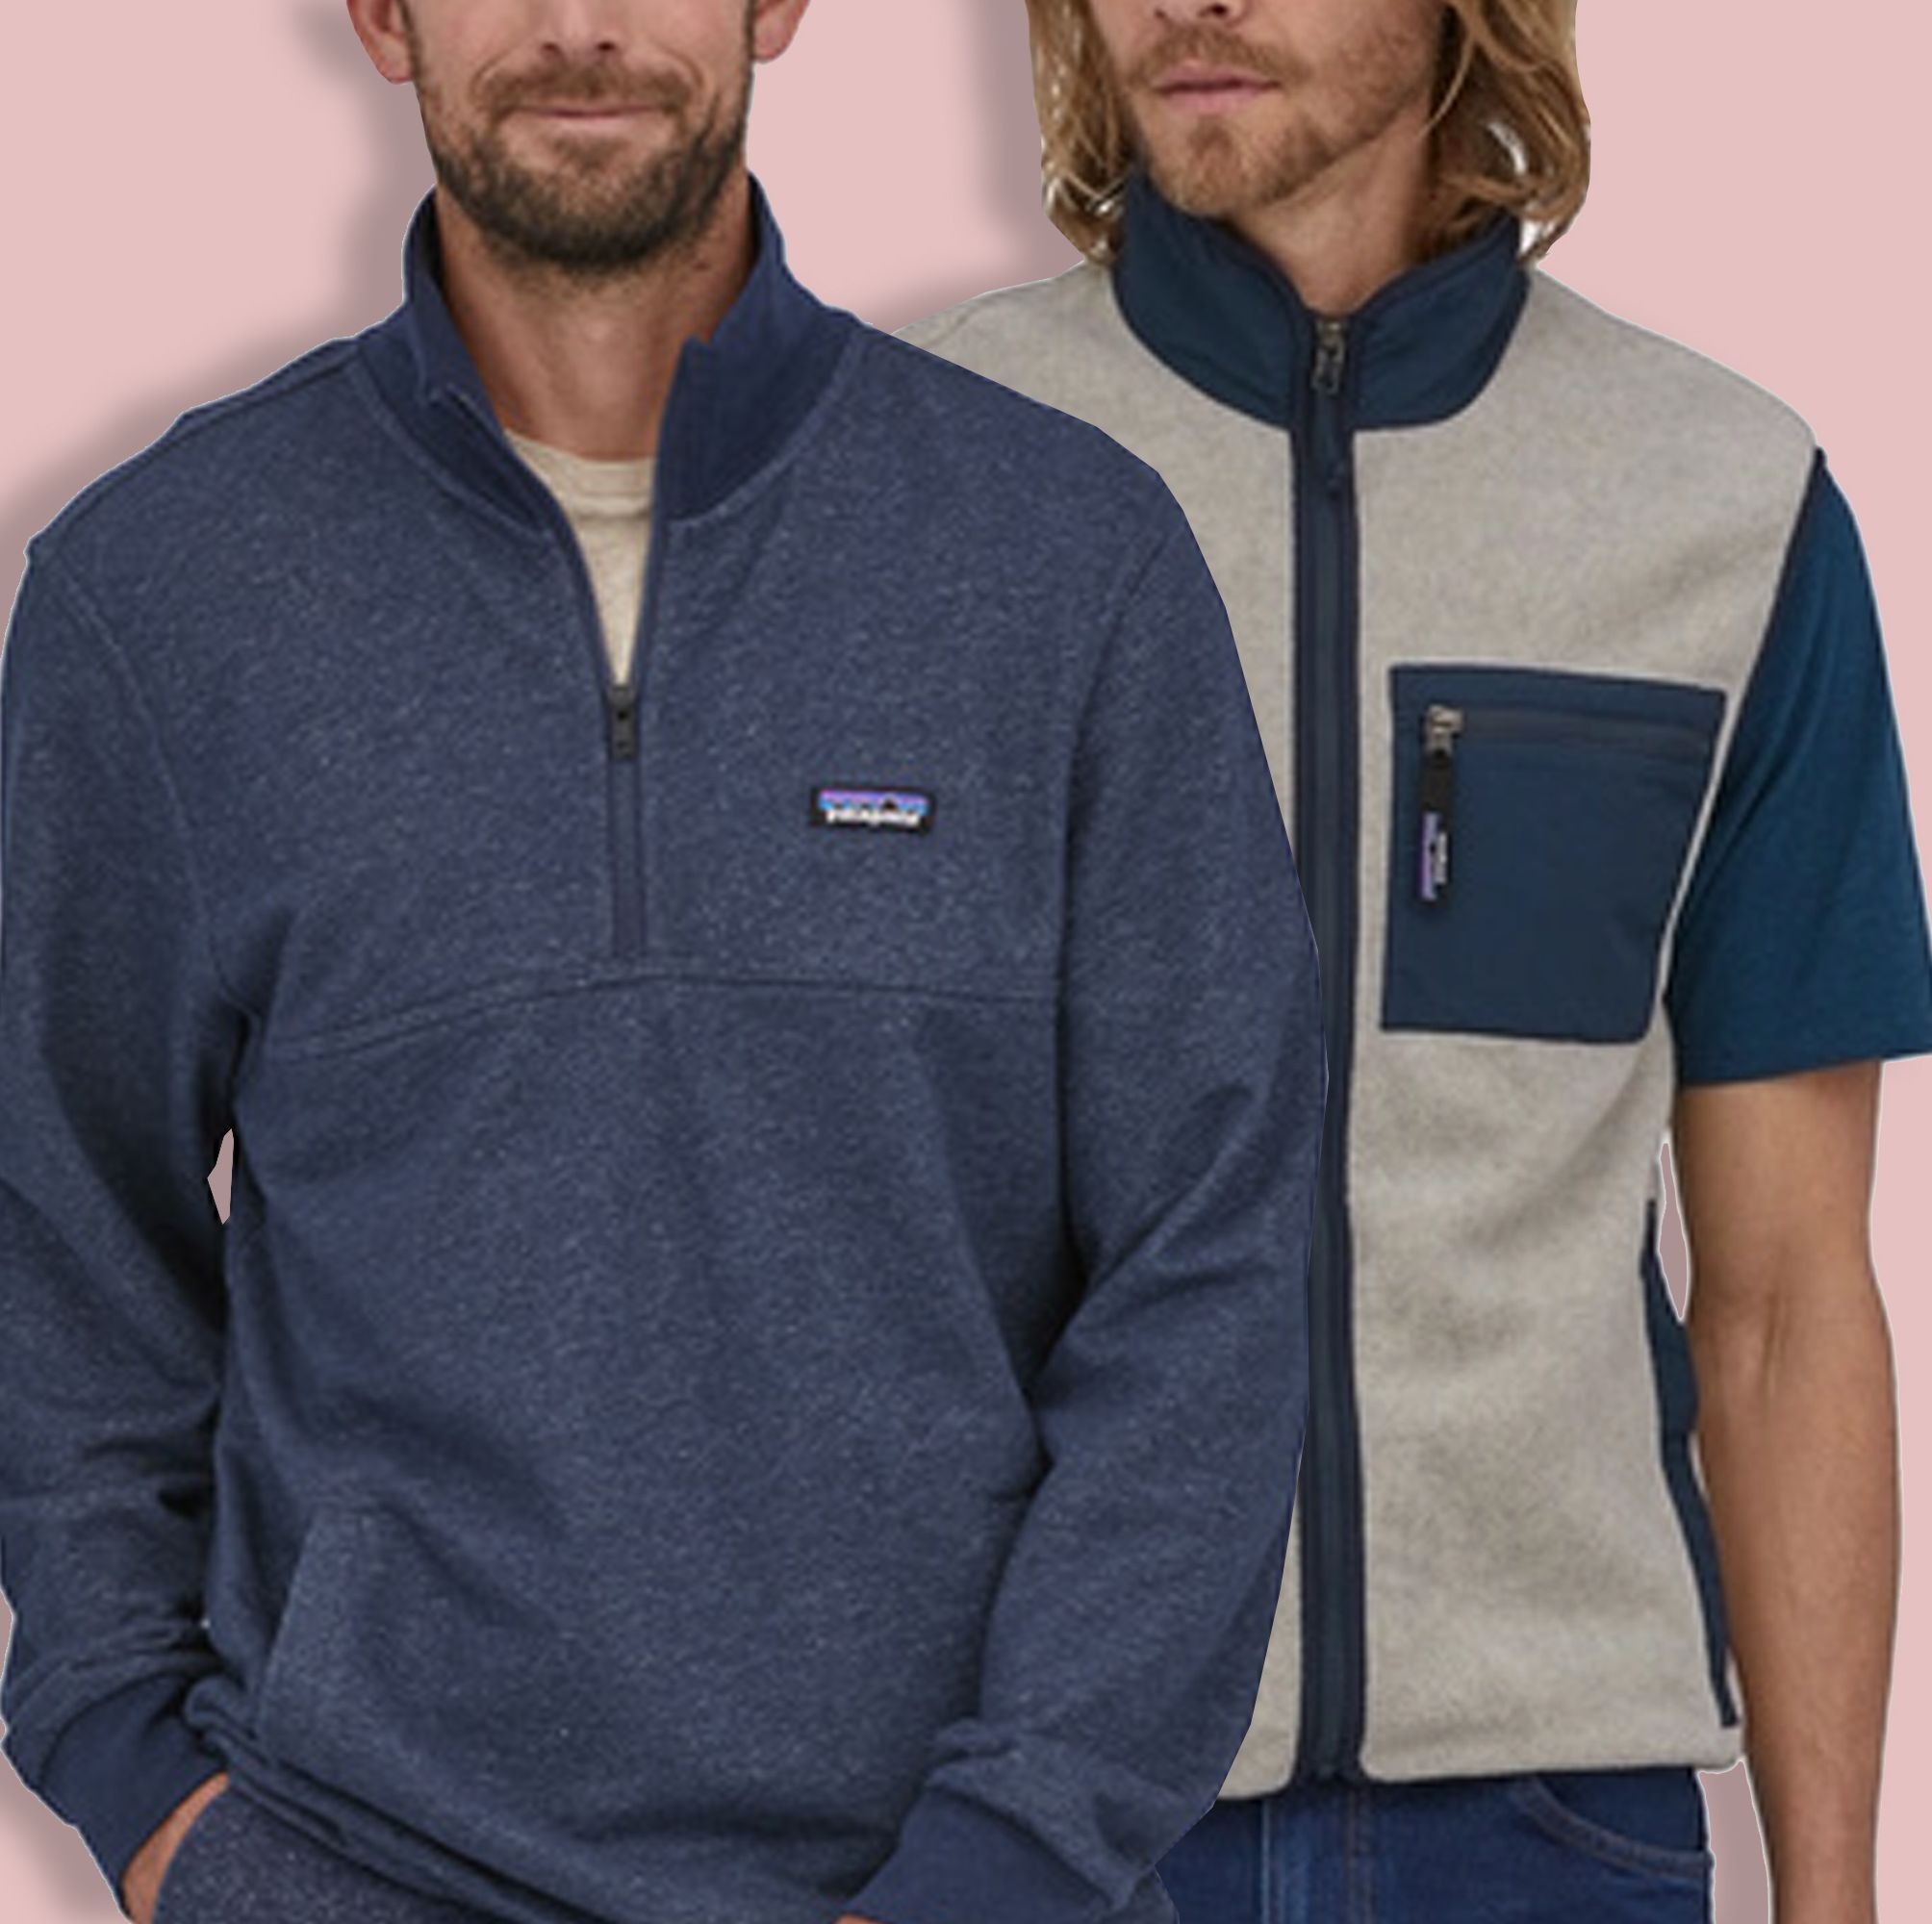 The Patagonia Sale Section Is the Place to Be Right Now